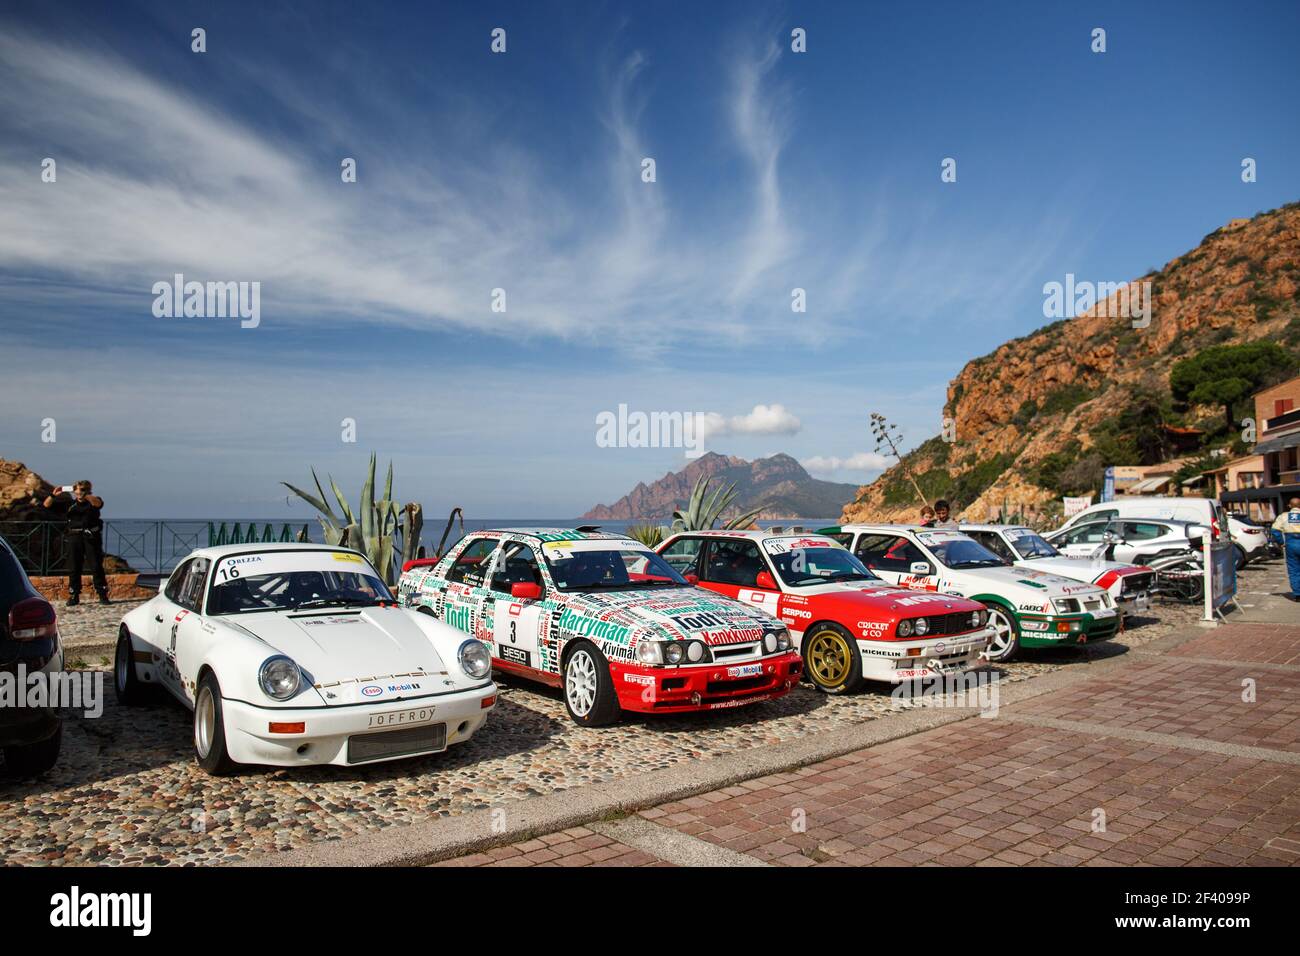 16 THOME Jean-Marc (fra), TYRAN Mathieu (fra), Porsche Carrera 3L RS, 03 CAZAUX Serge (fra), VILMOT Maxime (fra), Ford Sierra Cosworth, during the 2018 Tour de Corse historique from october 8 to 13 in Corsica, France - Photo Antonin Vincent / DPPI Stock Photo